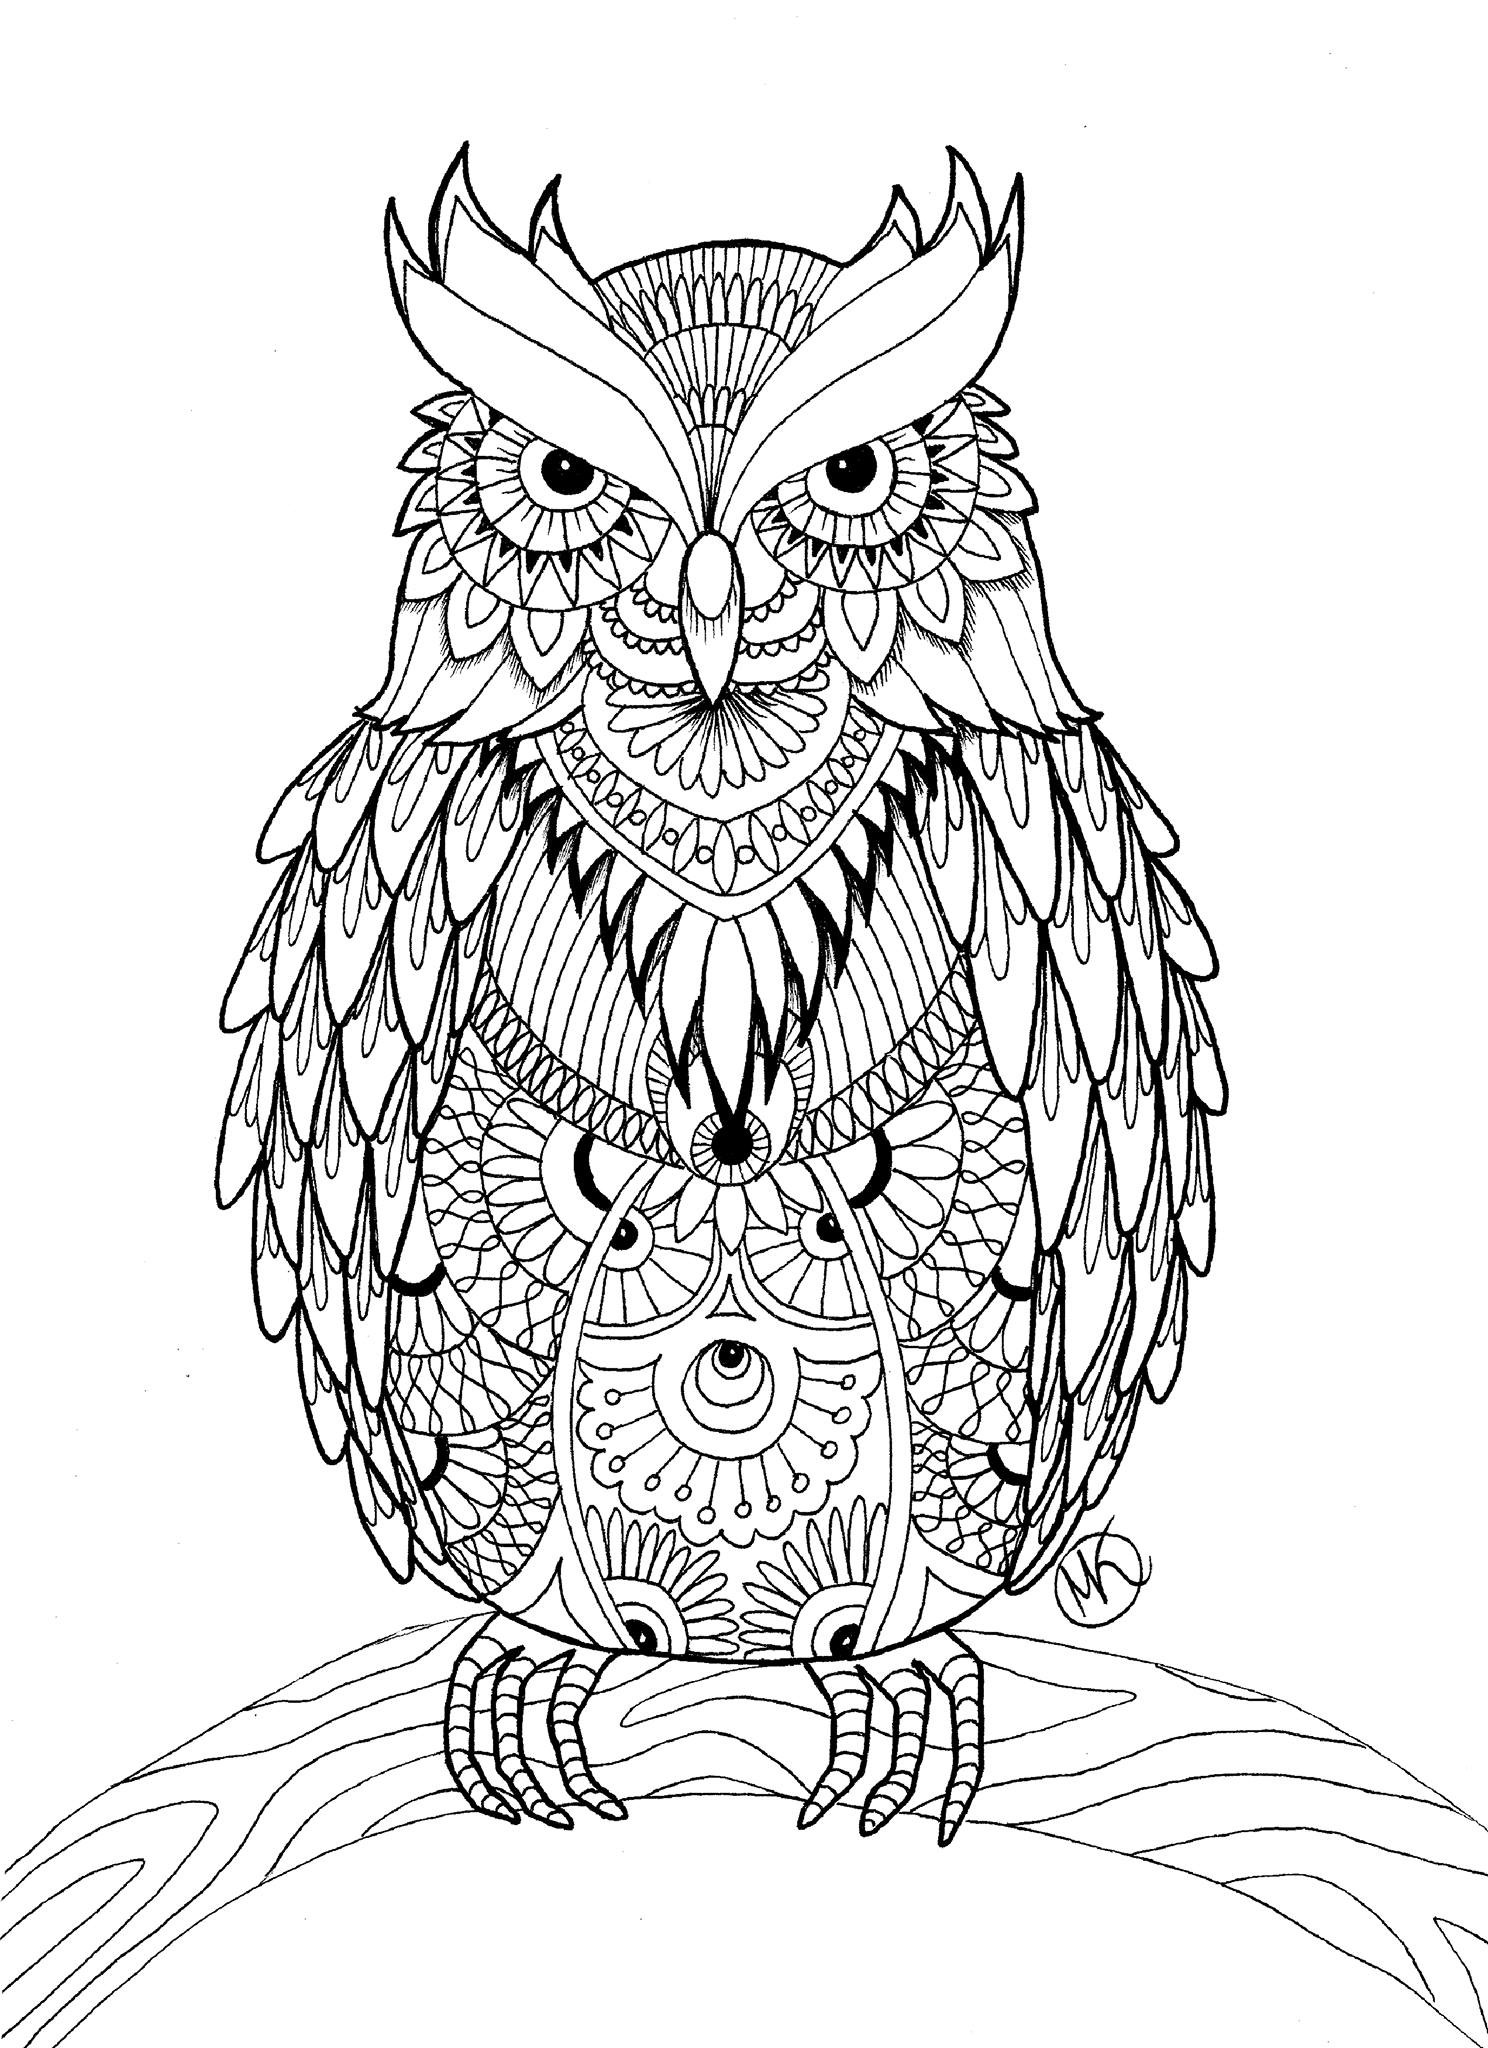 Coloring Pages For Adults Printable
 OWL Coloring Pages for Adults Free Detailed Owl Coloring